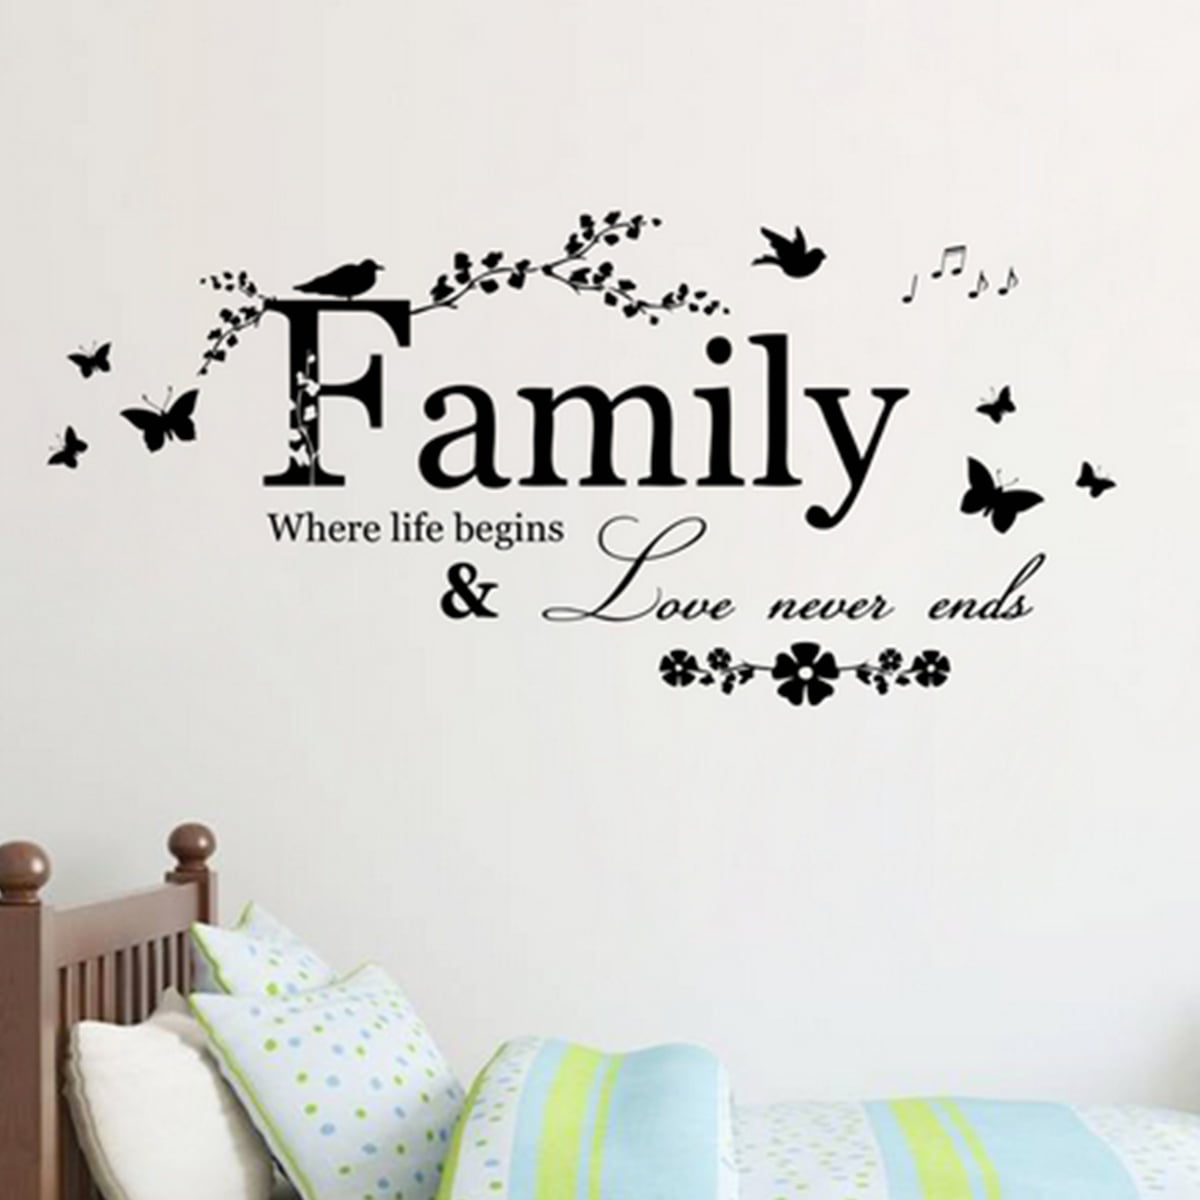 Home Family Blessing Quote Bedroom Home Décor Wall Art Sticker Vinyl Transfer